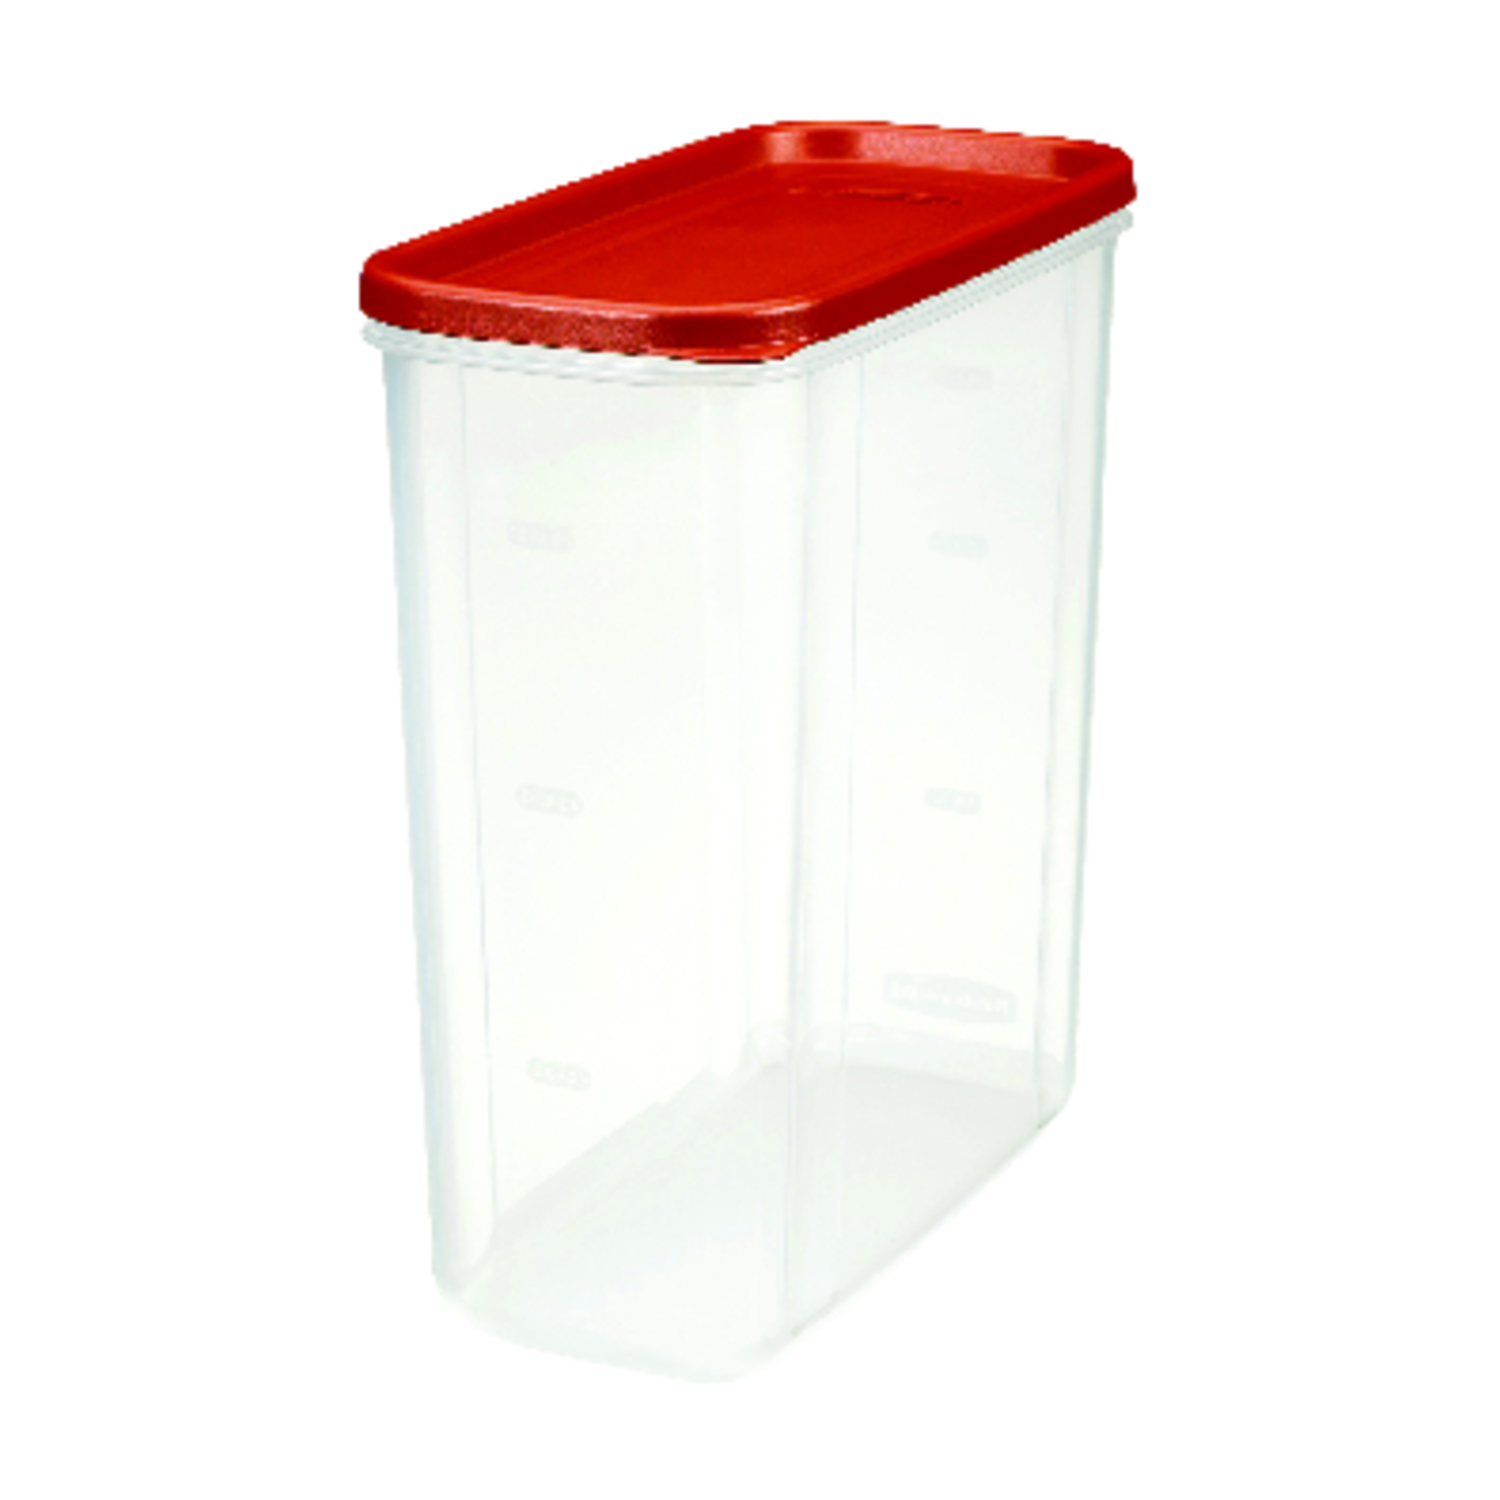 Rubbermaid Dry Food Storage 10 Cup Clear Base Featuring Graduation Marks